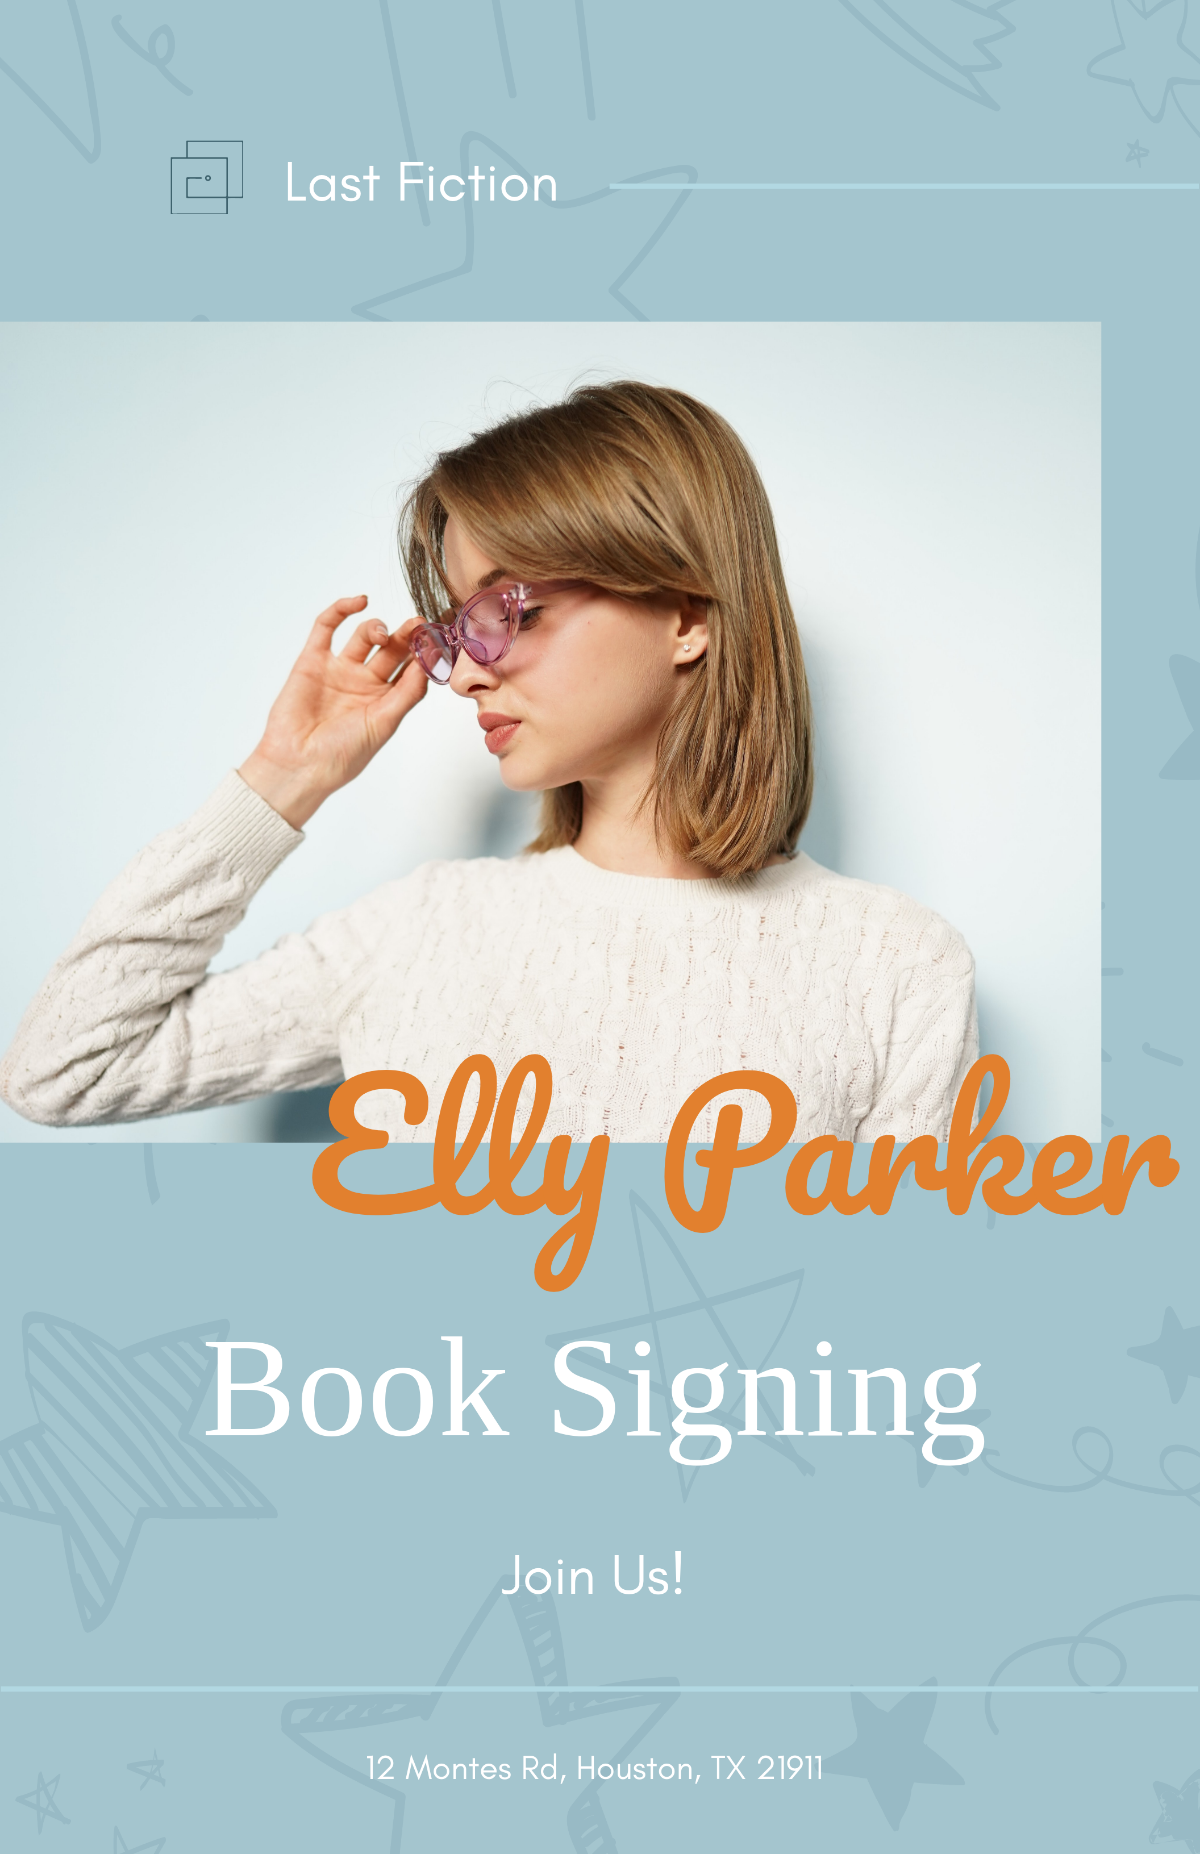 Book Signing Promotion Poster Template